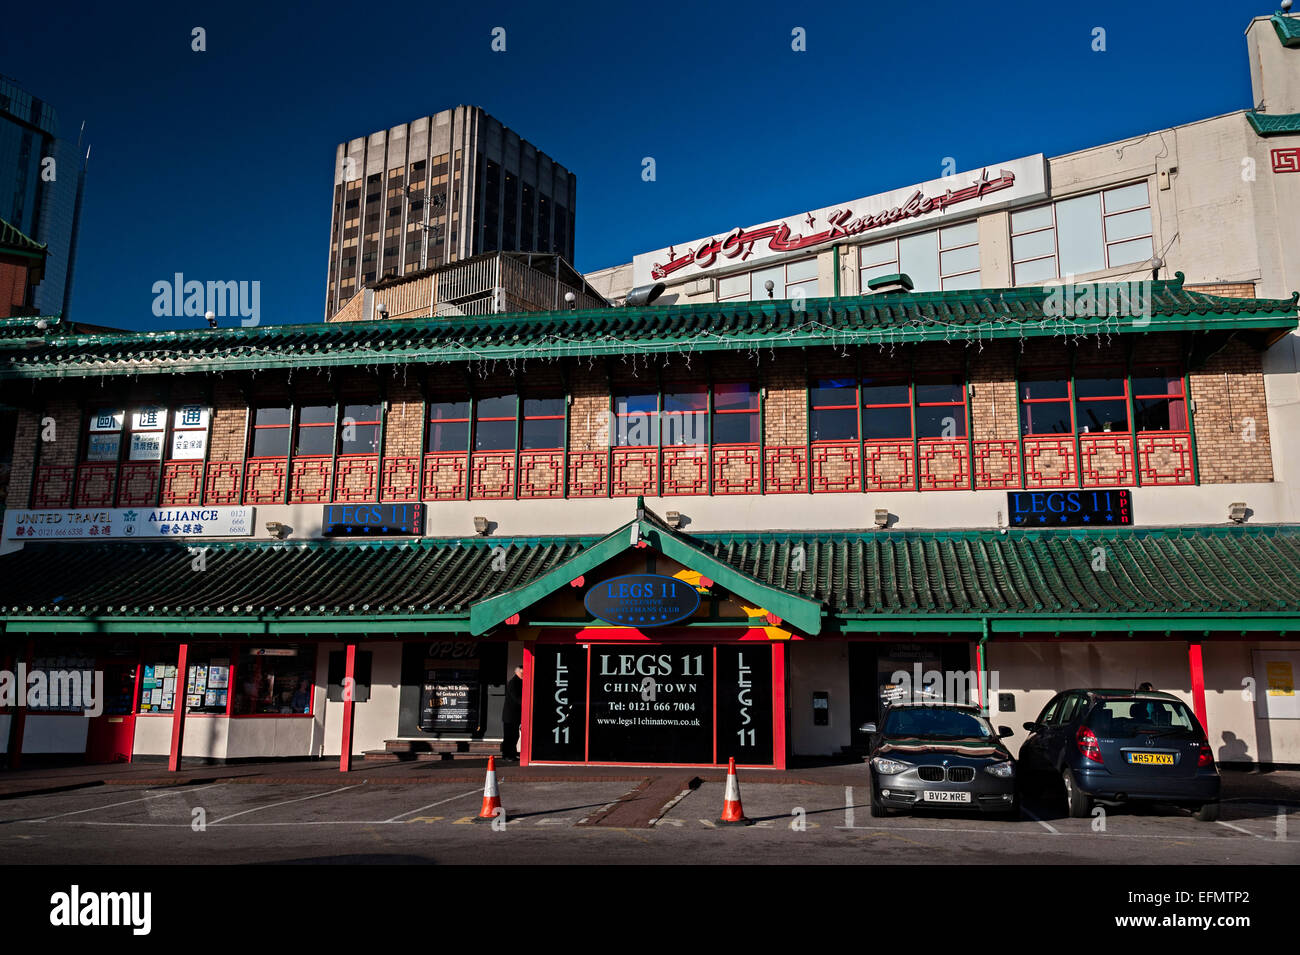 shops china town Birmingham city and home of legs 11 lap dancing club in the foreground Stock Photo